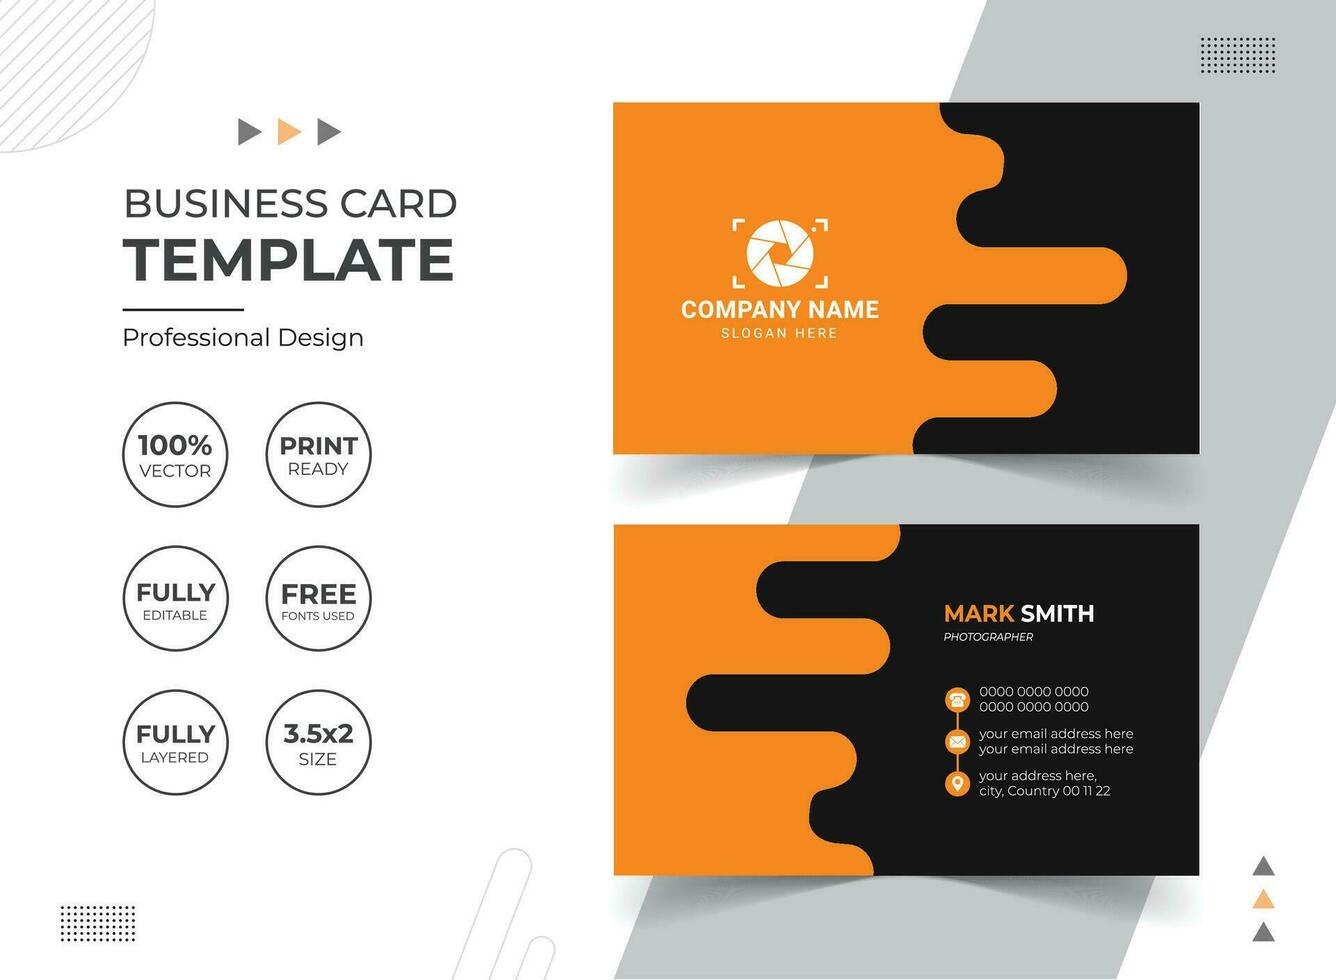 Multipurpose Creative and Modern Business Card Design Template vector